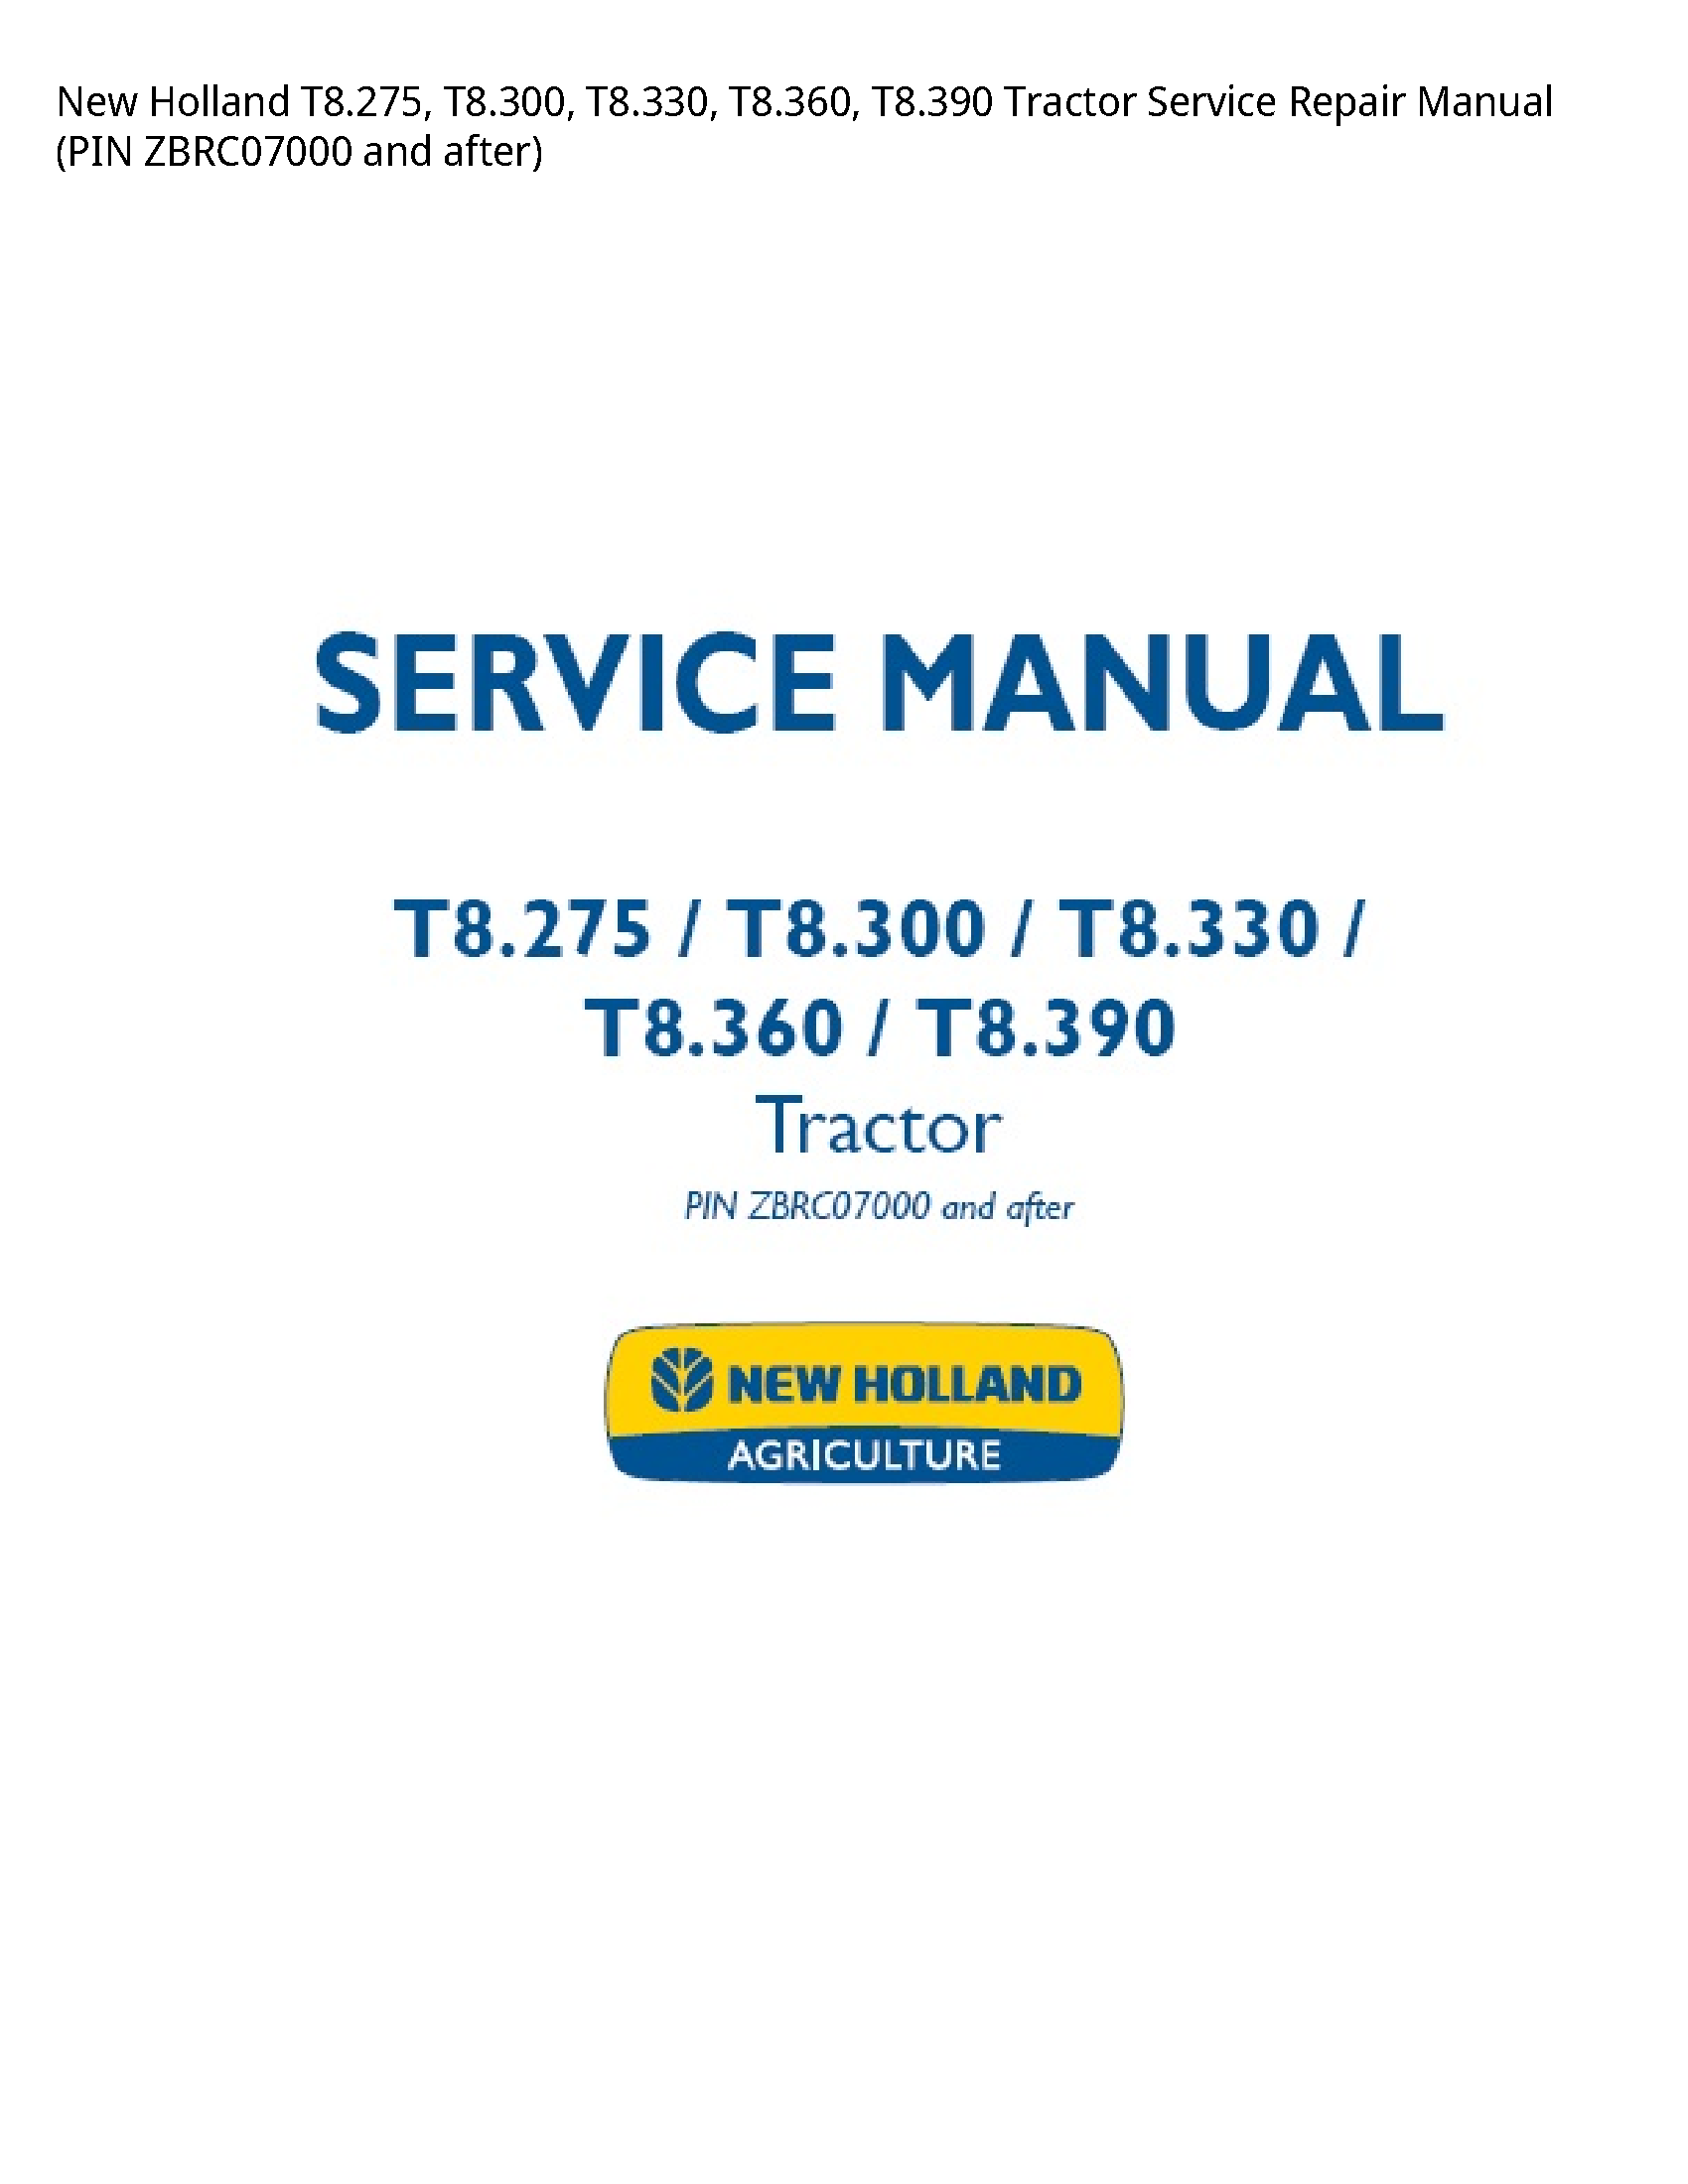 New Holland T8.275 Tractor manual